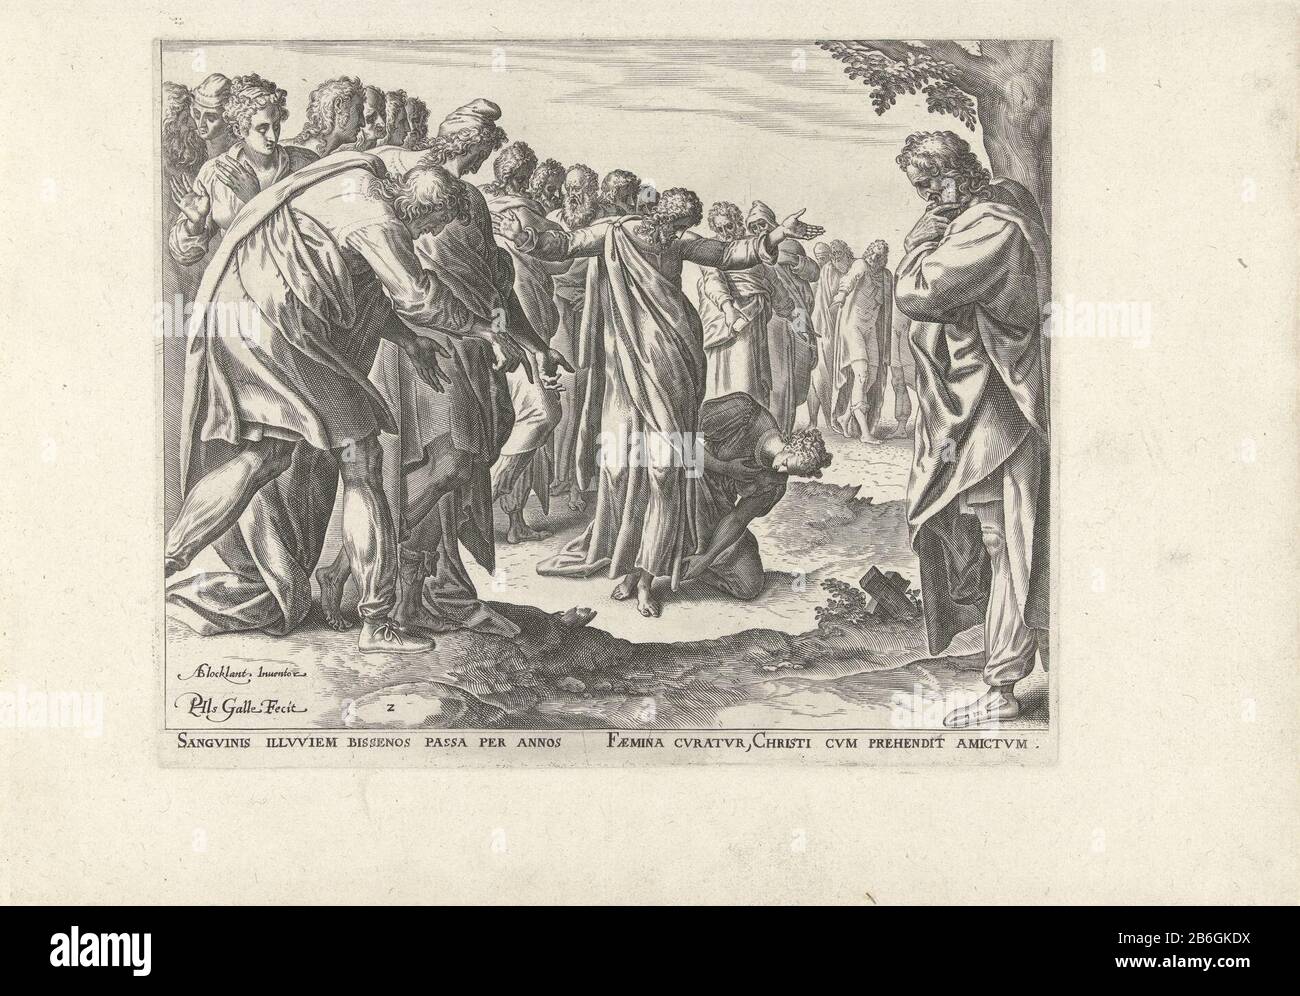 Christ is among a group of men in front of the temple. A sick woman kneeling beside him on the floor and touch the hem of his robe to heal her ziekte. Manufacturer : printmaker: Philip Galle (listed property) designed by: Anthonie Blocklandt (listed property) Place manufacture: Antwerp Dated: ca. 1577 - ca. 1579 Physical characteristics: engra material: paper Technique: engra (printing process) Measurements: plate edge: h 210 mm × W 260 mm Subject: healing of a woman with an issue of blood: she kneels before Christ after ha touched his robe (Matthew 9: 20-22; Mark 5: 25-34; Luke 8: 43-48) Stock Photo